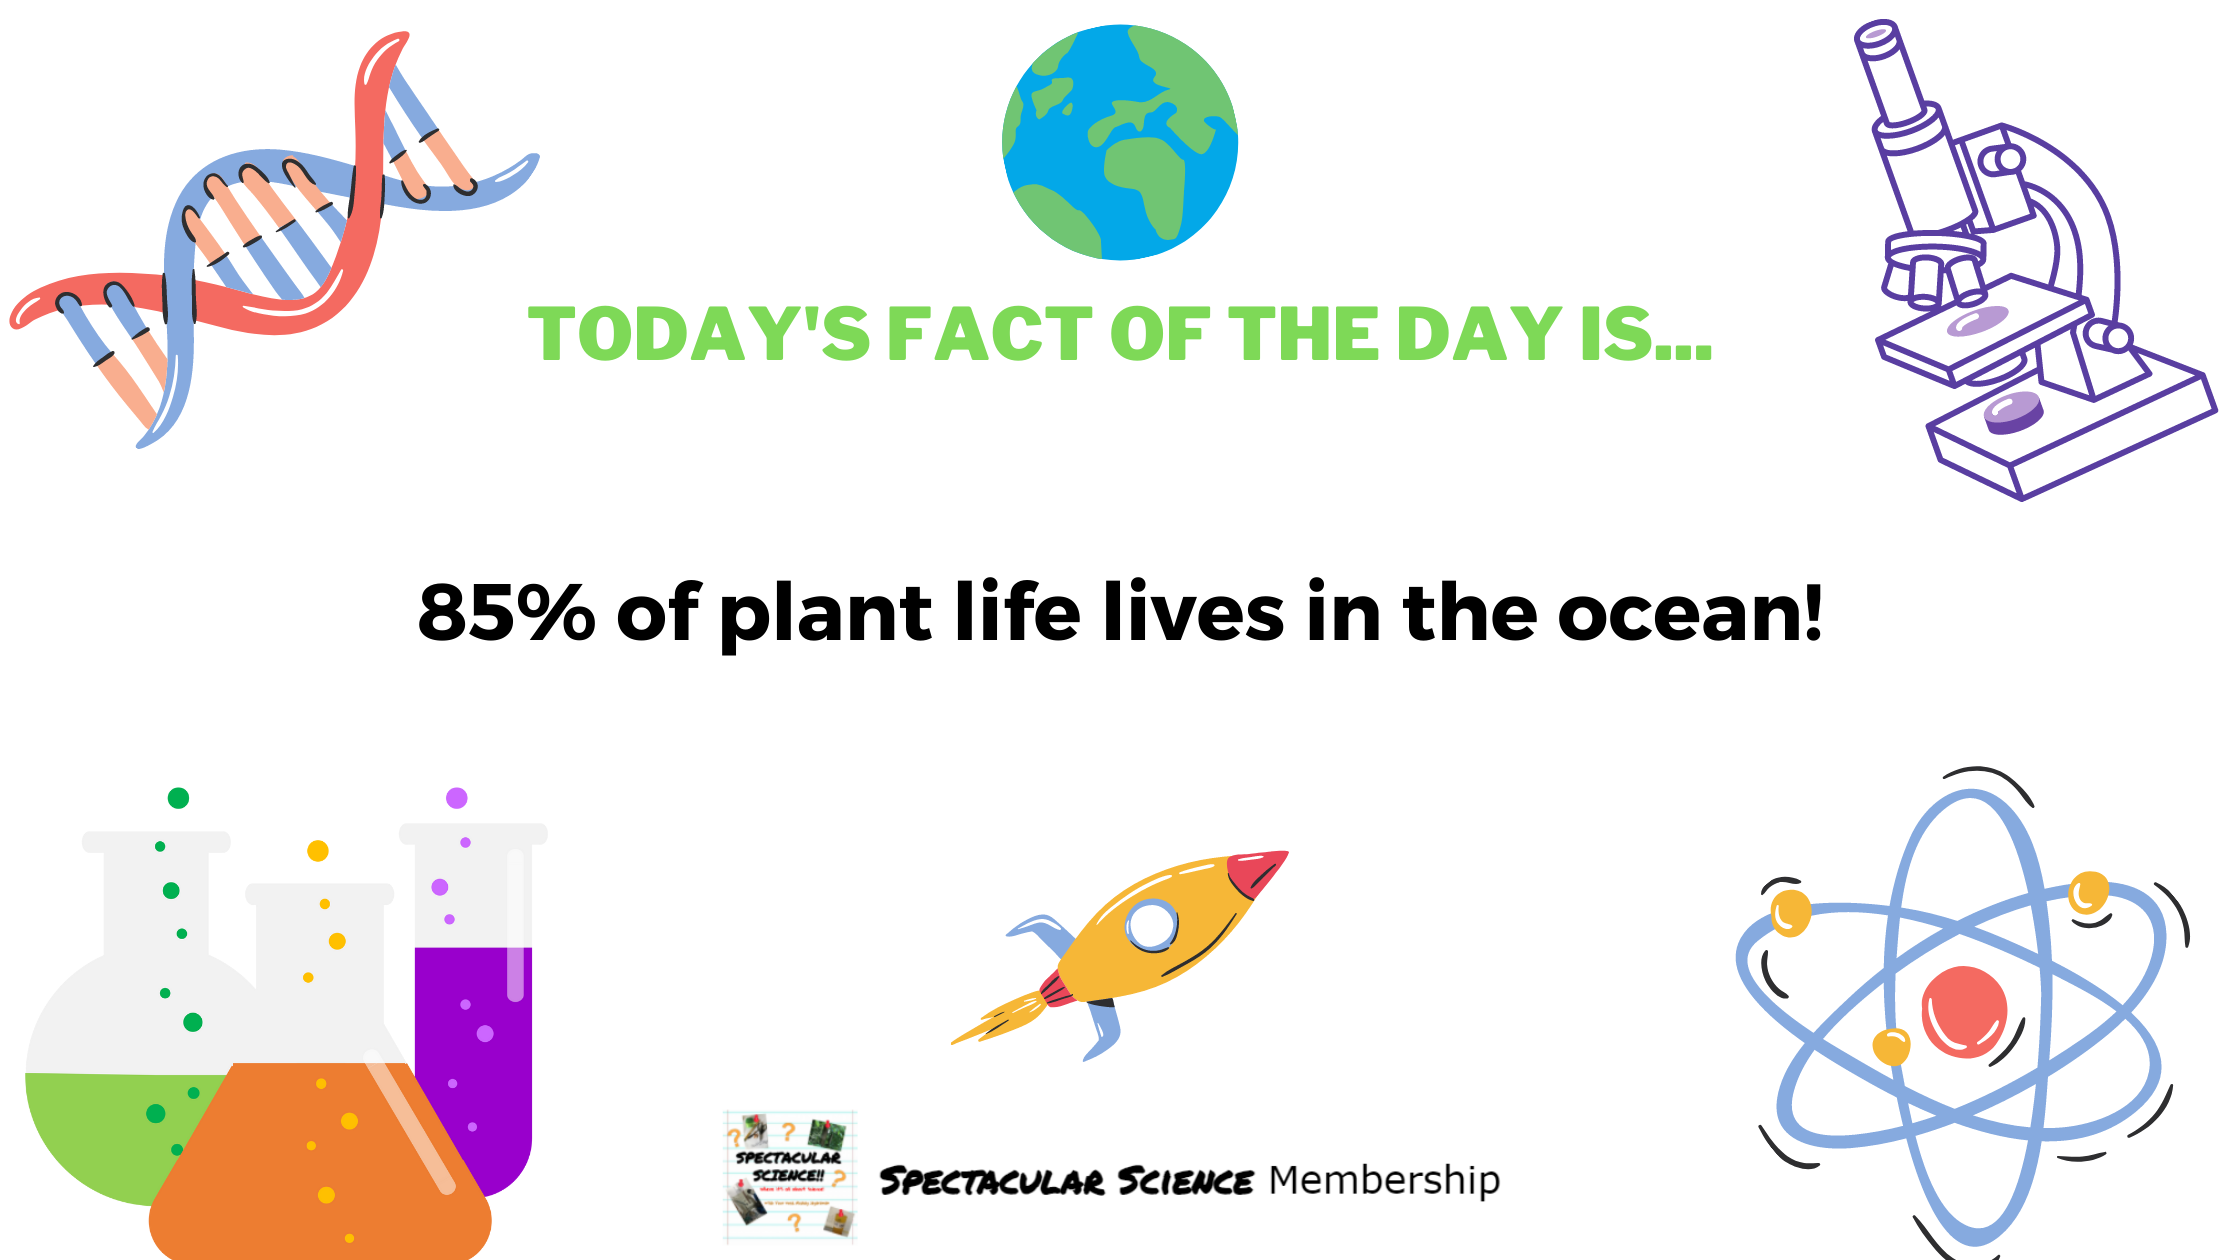 Fact of the Day Image Feb. 17th